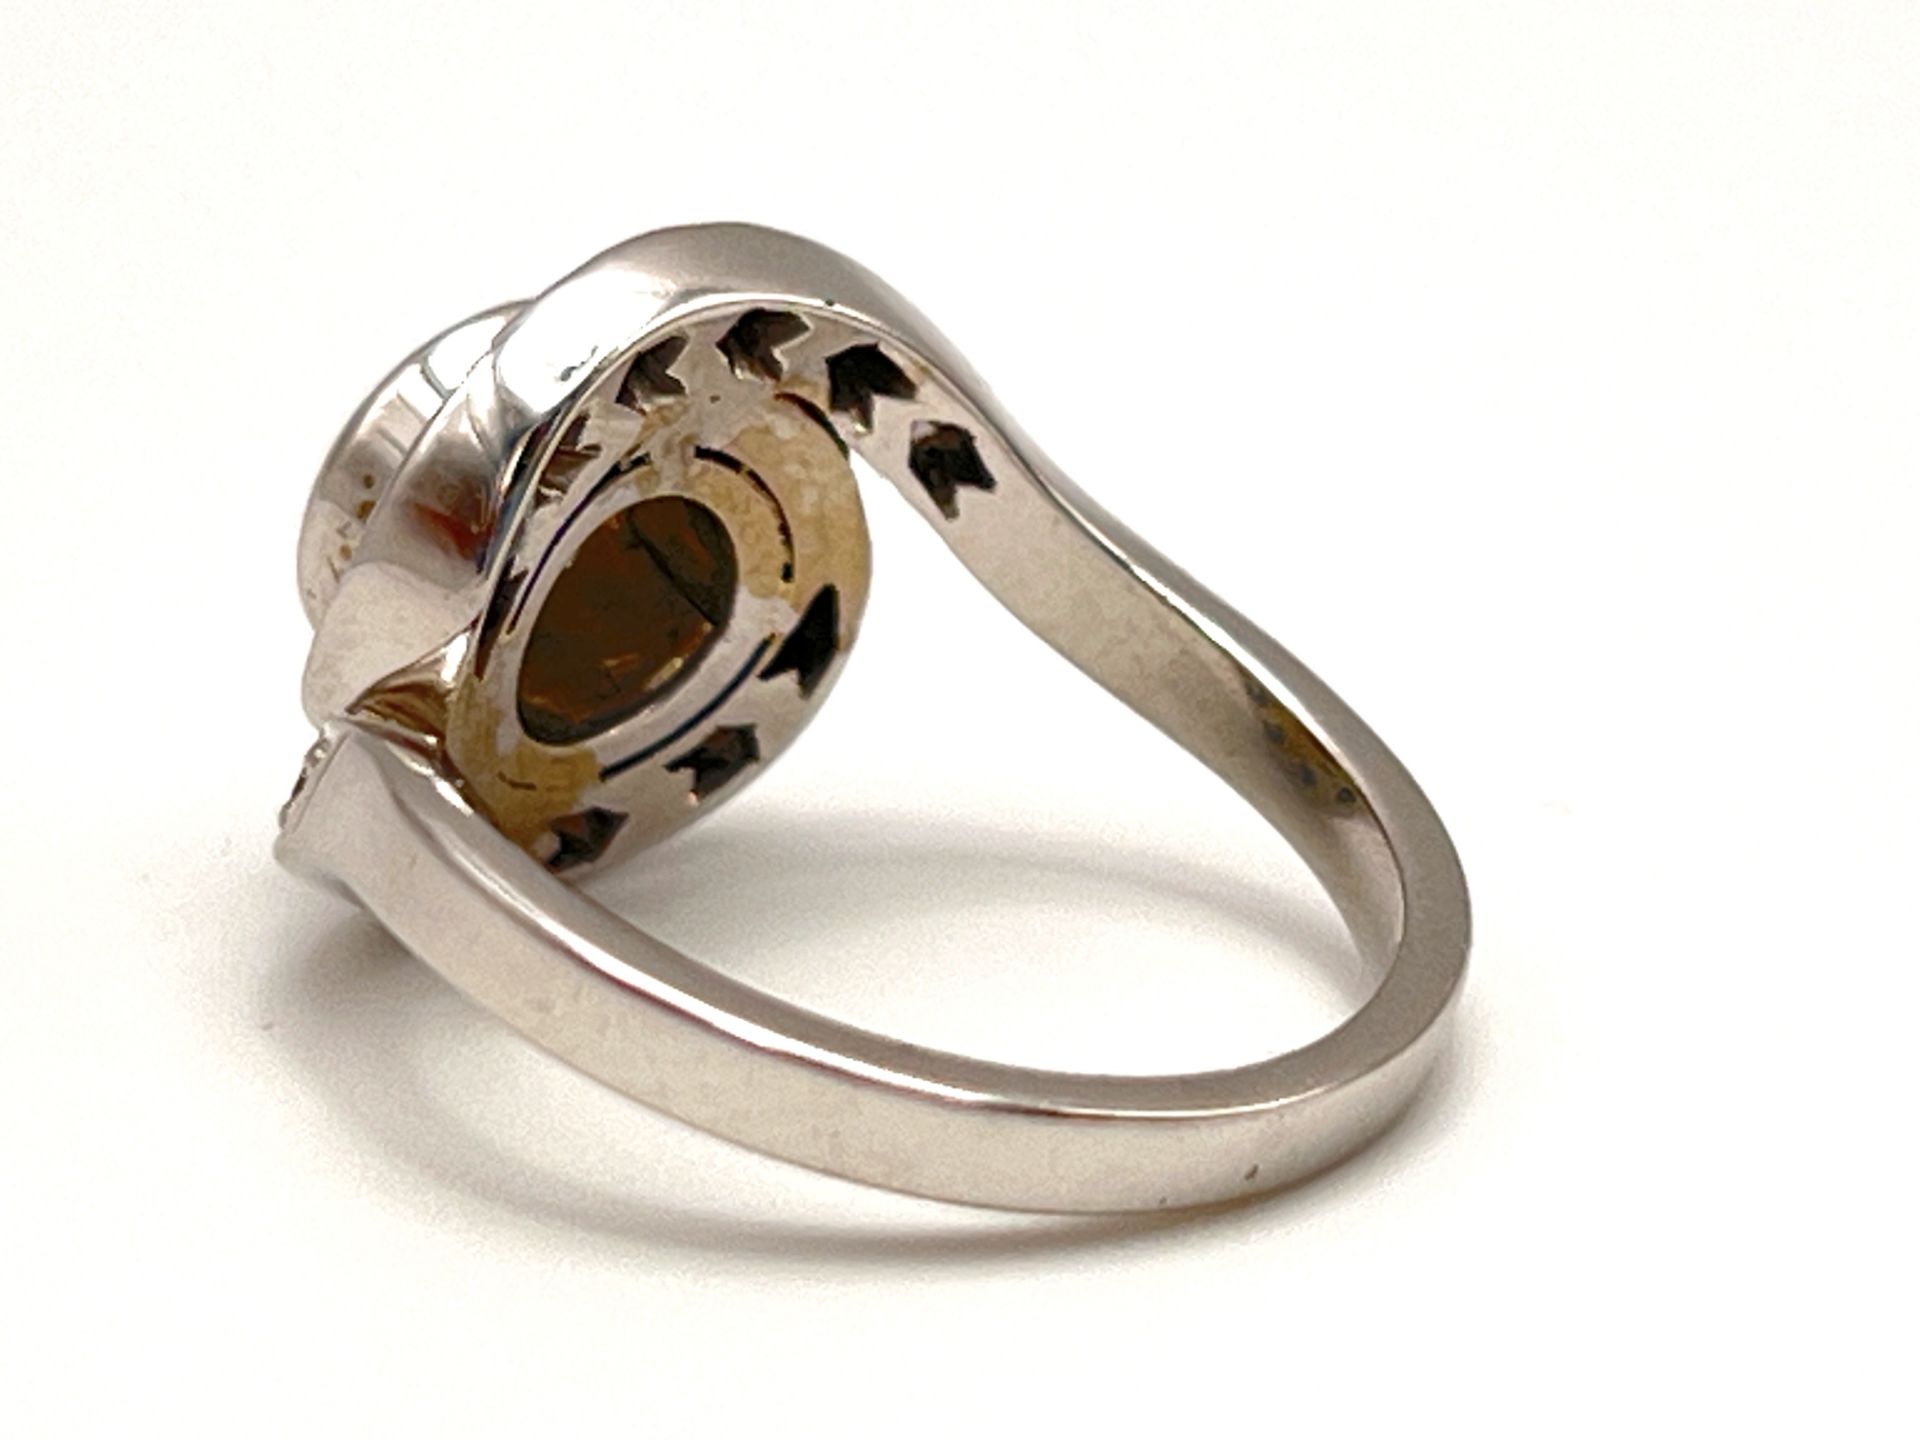 Solitaire ring - Image 5 of 6